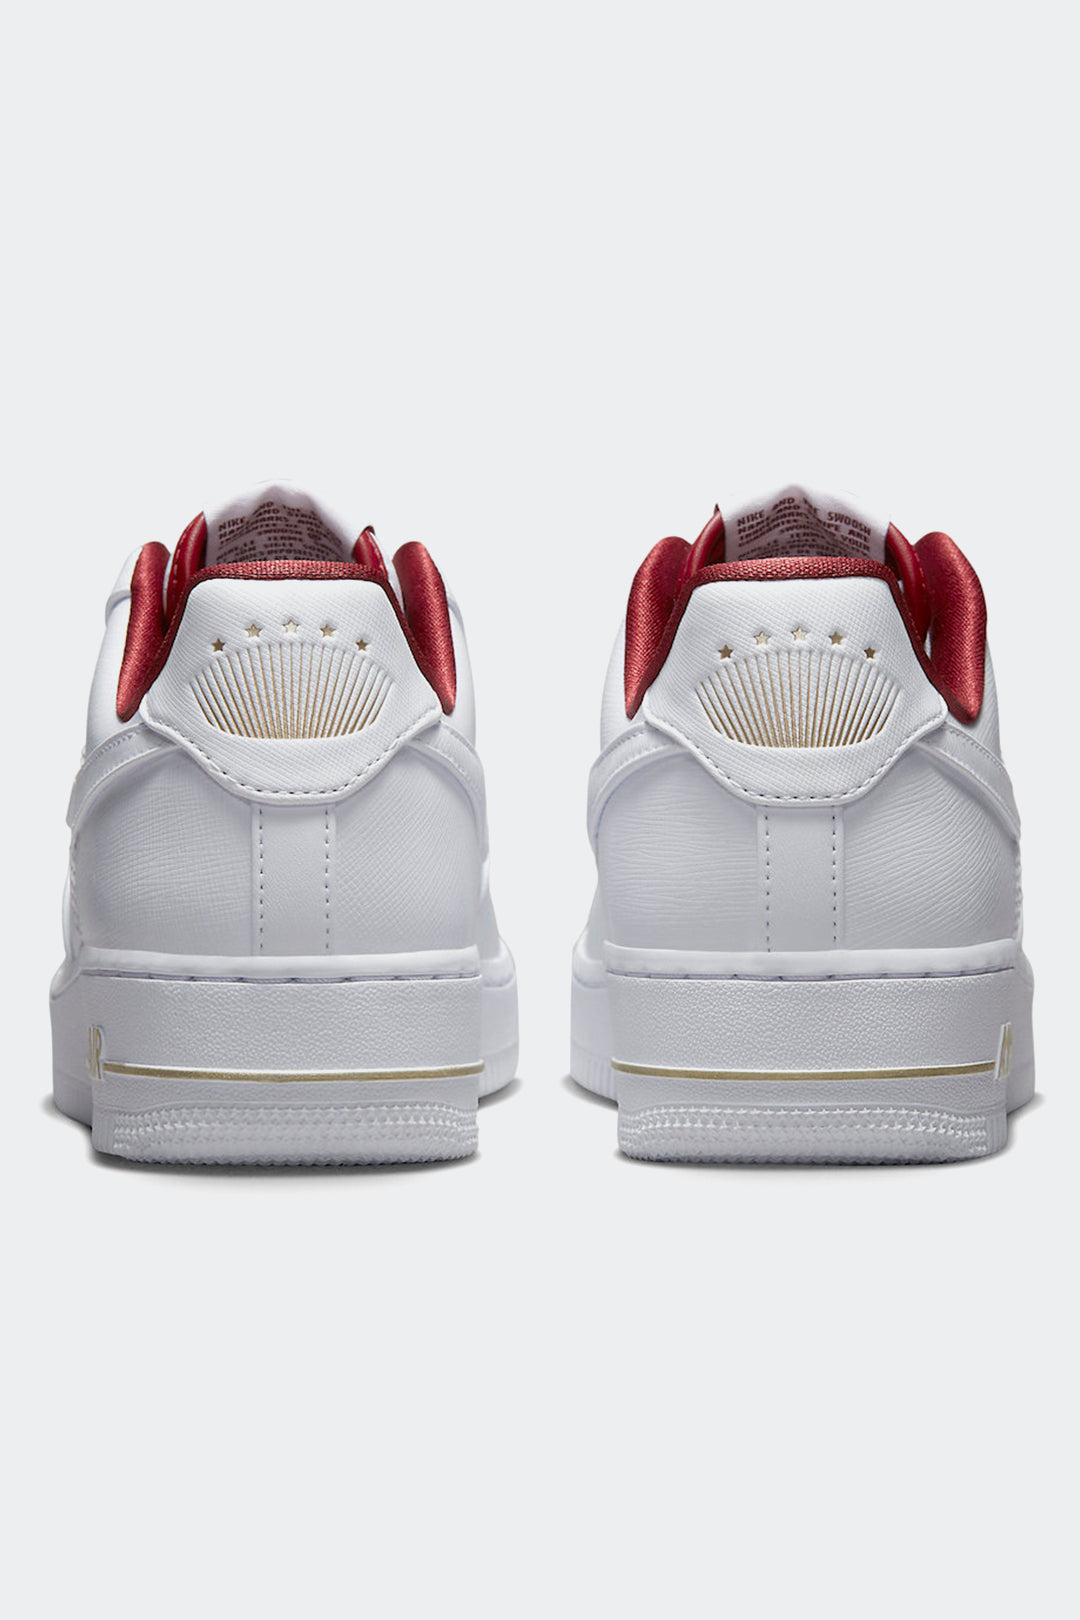 NIKE AIR FORCE 1 '07 SE "SWOOSH POCKET" - MUJER - HYPE